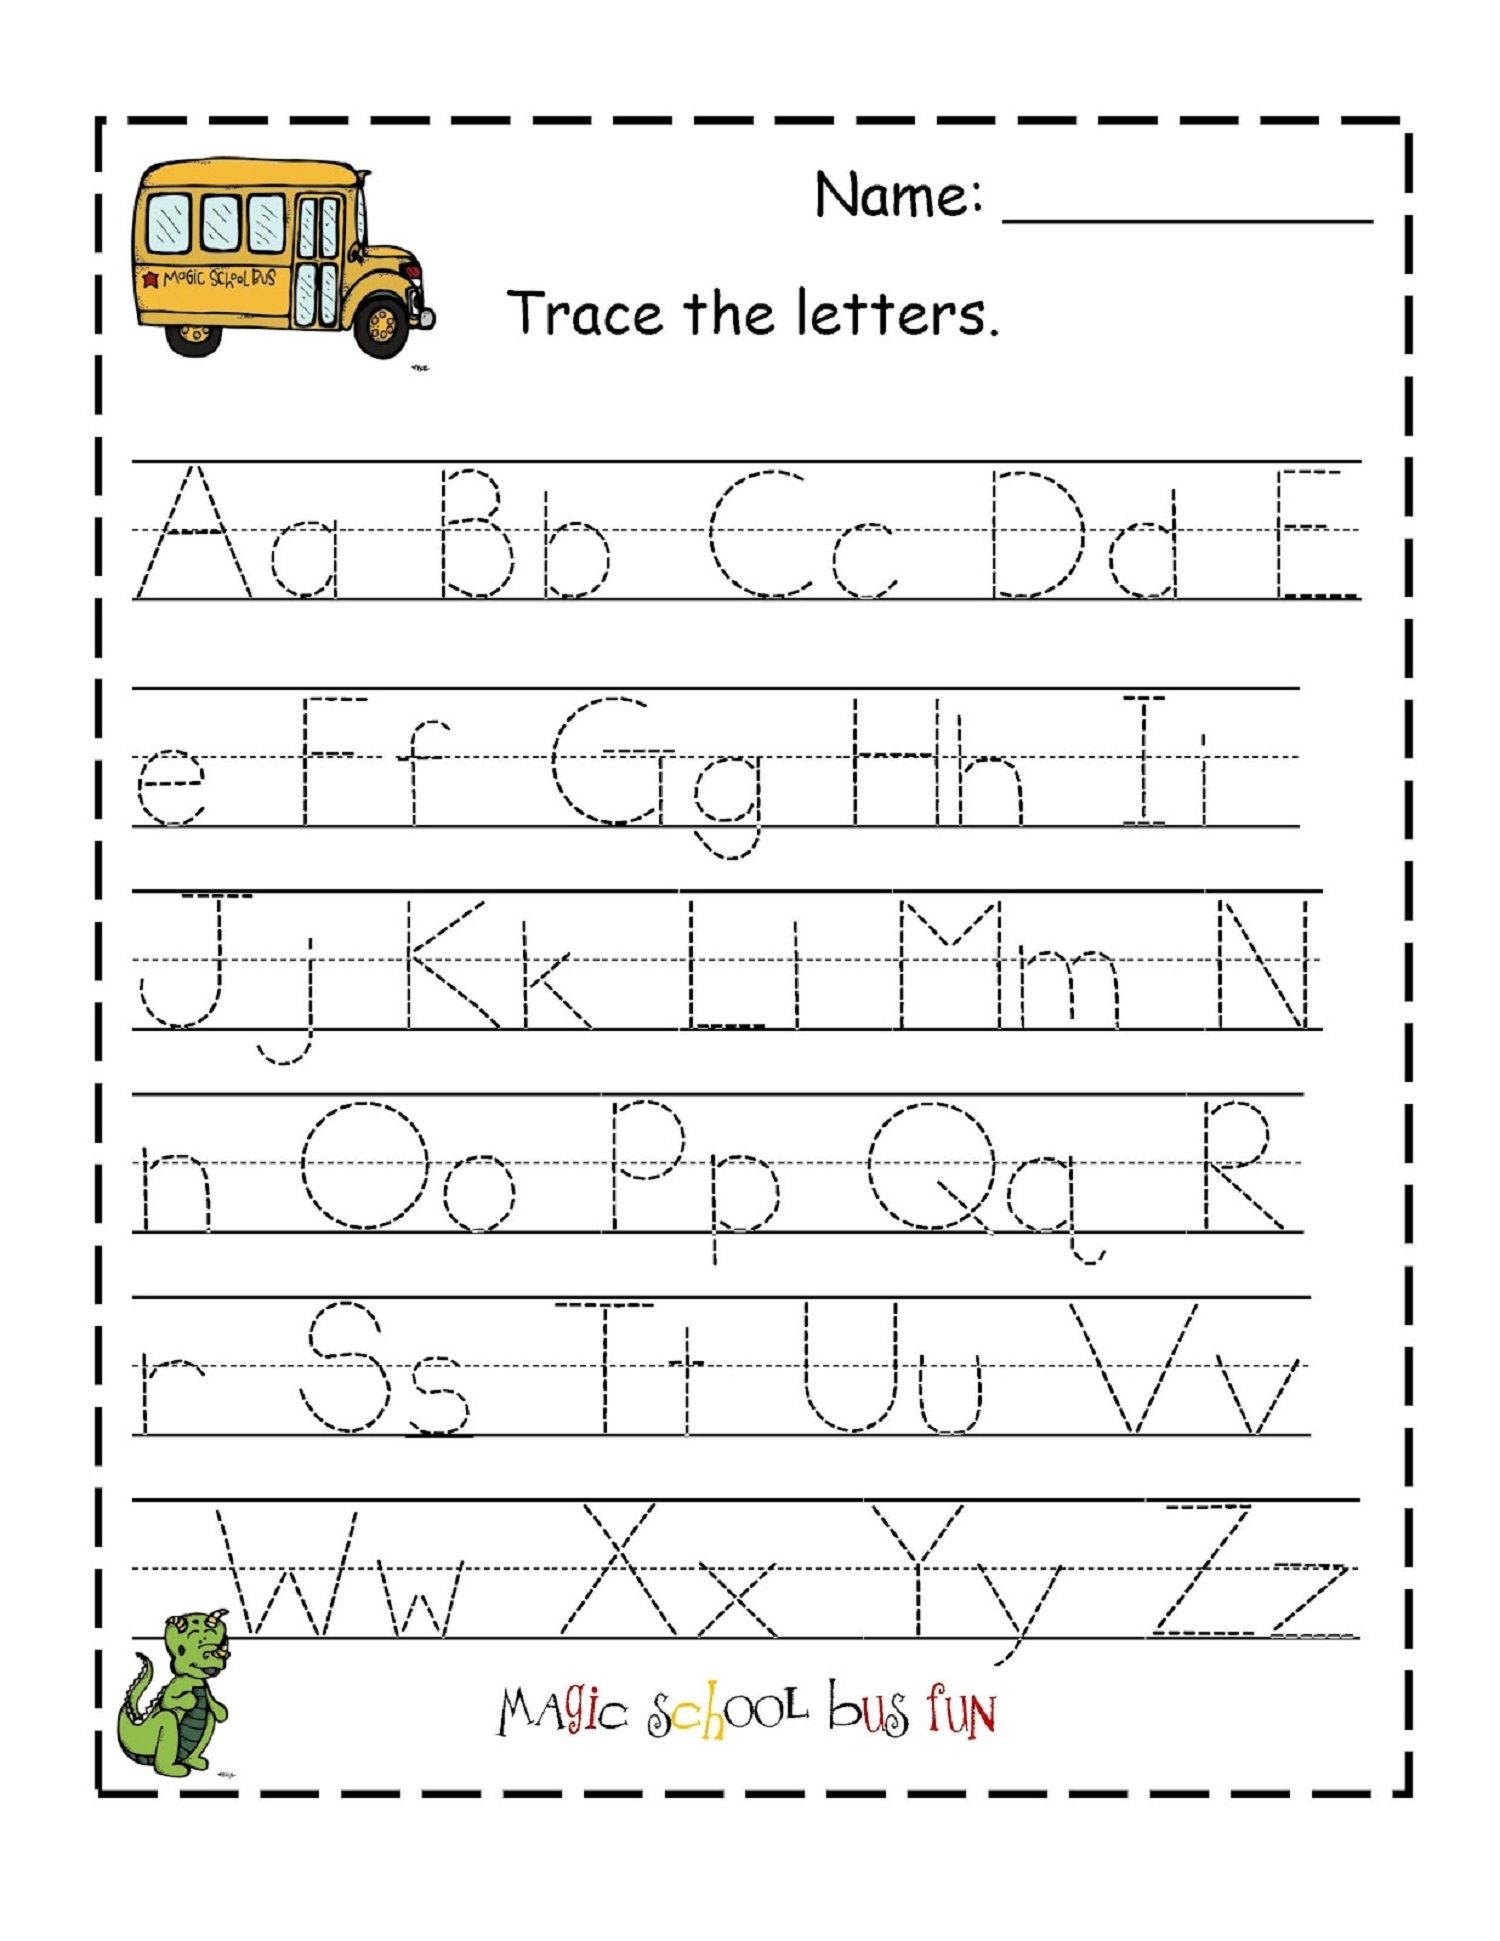 Traceable Alphabet For Learning Exercise | Letter Tracing inside Letter Tracing Worksheets With Arrows